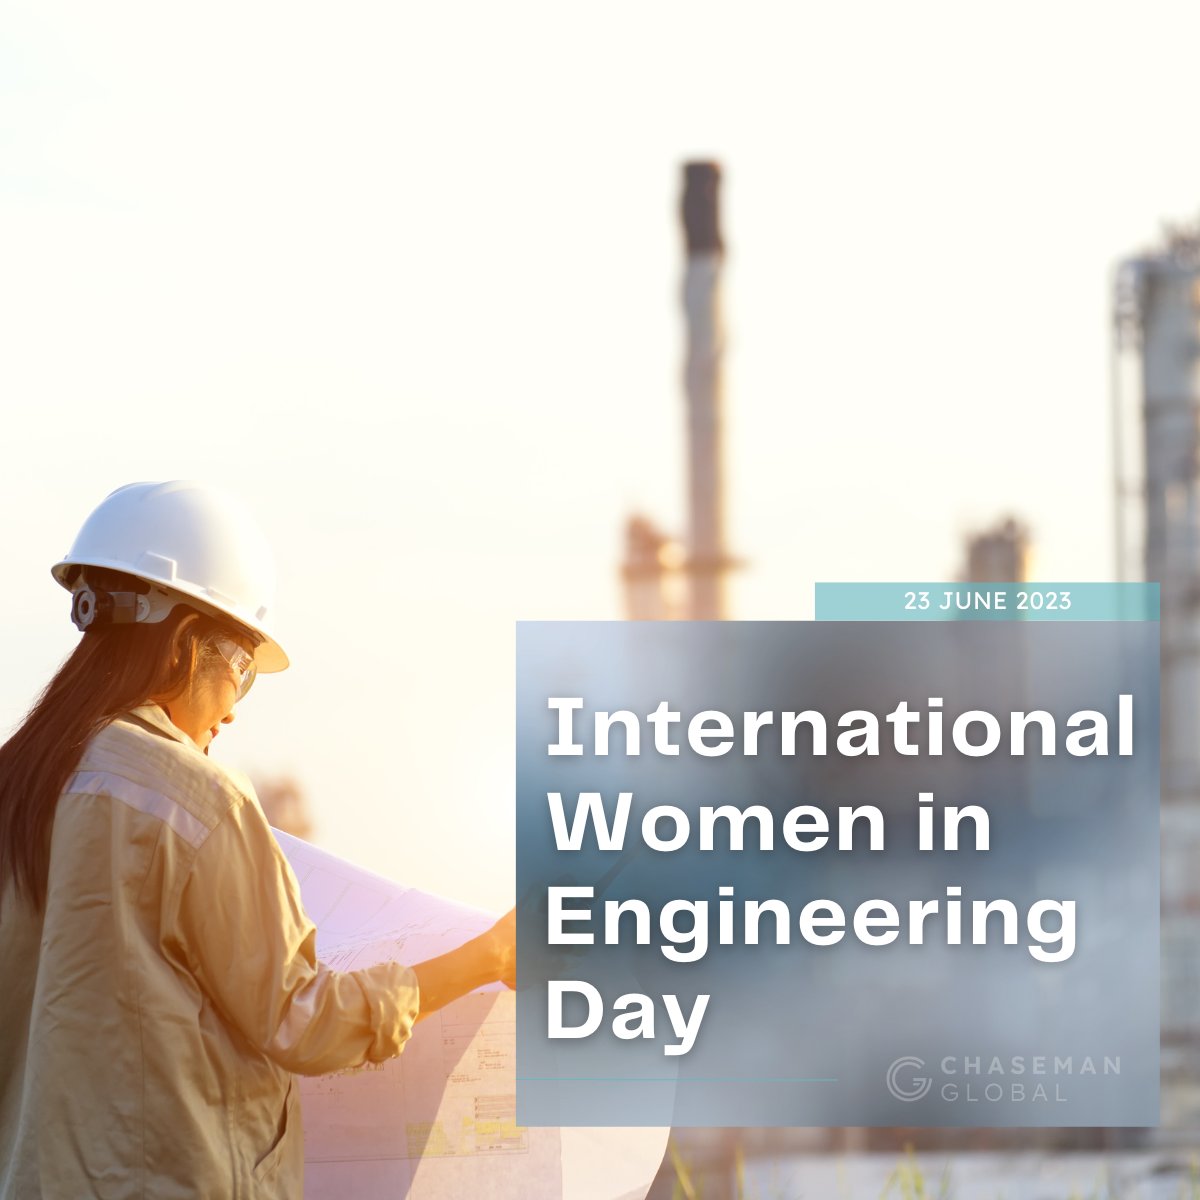 Celebrating #INWED21: International Women in Engineering Day! 👩‍🔬💡

Let's challenge stereotypes, foster inclusivity, and inspire the next generation. Together, we can build a diverse and equitable engineering community!

#WomenInEngineering #DiversityInSTEM #LifeSciences